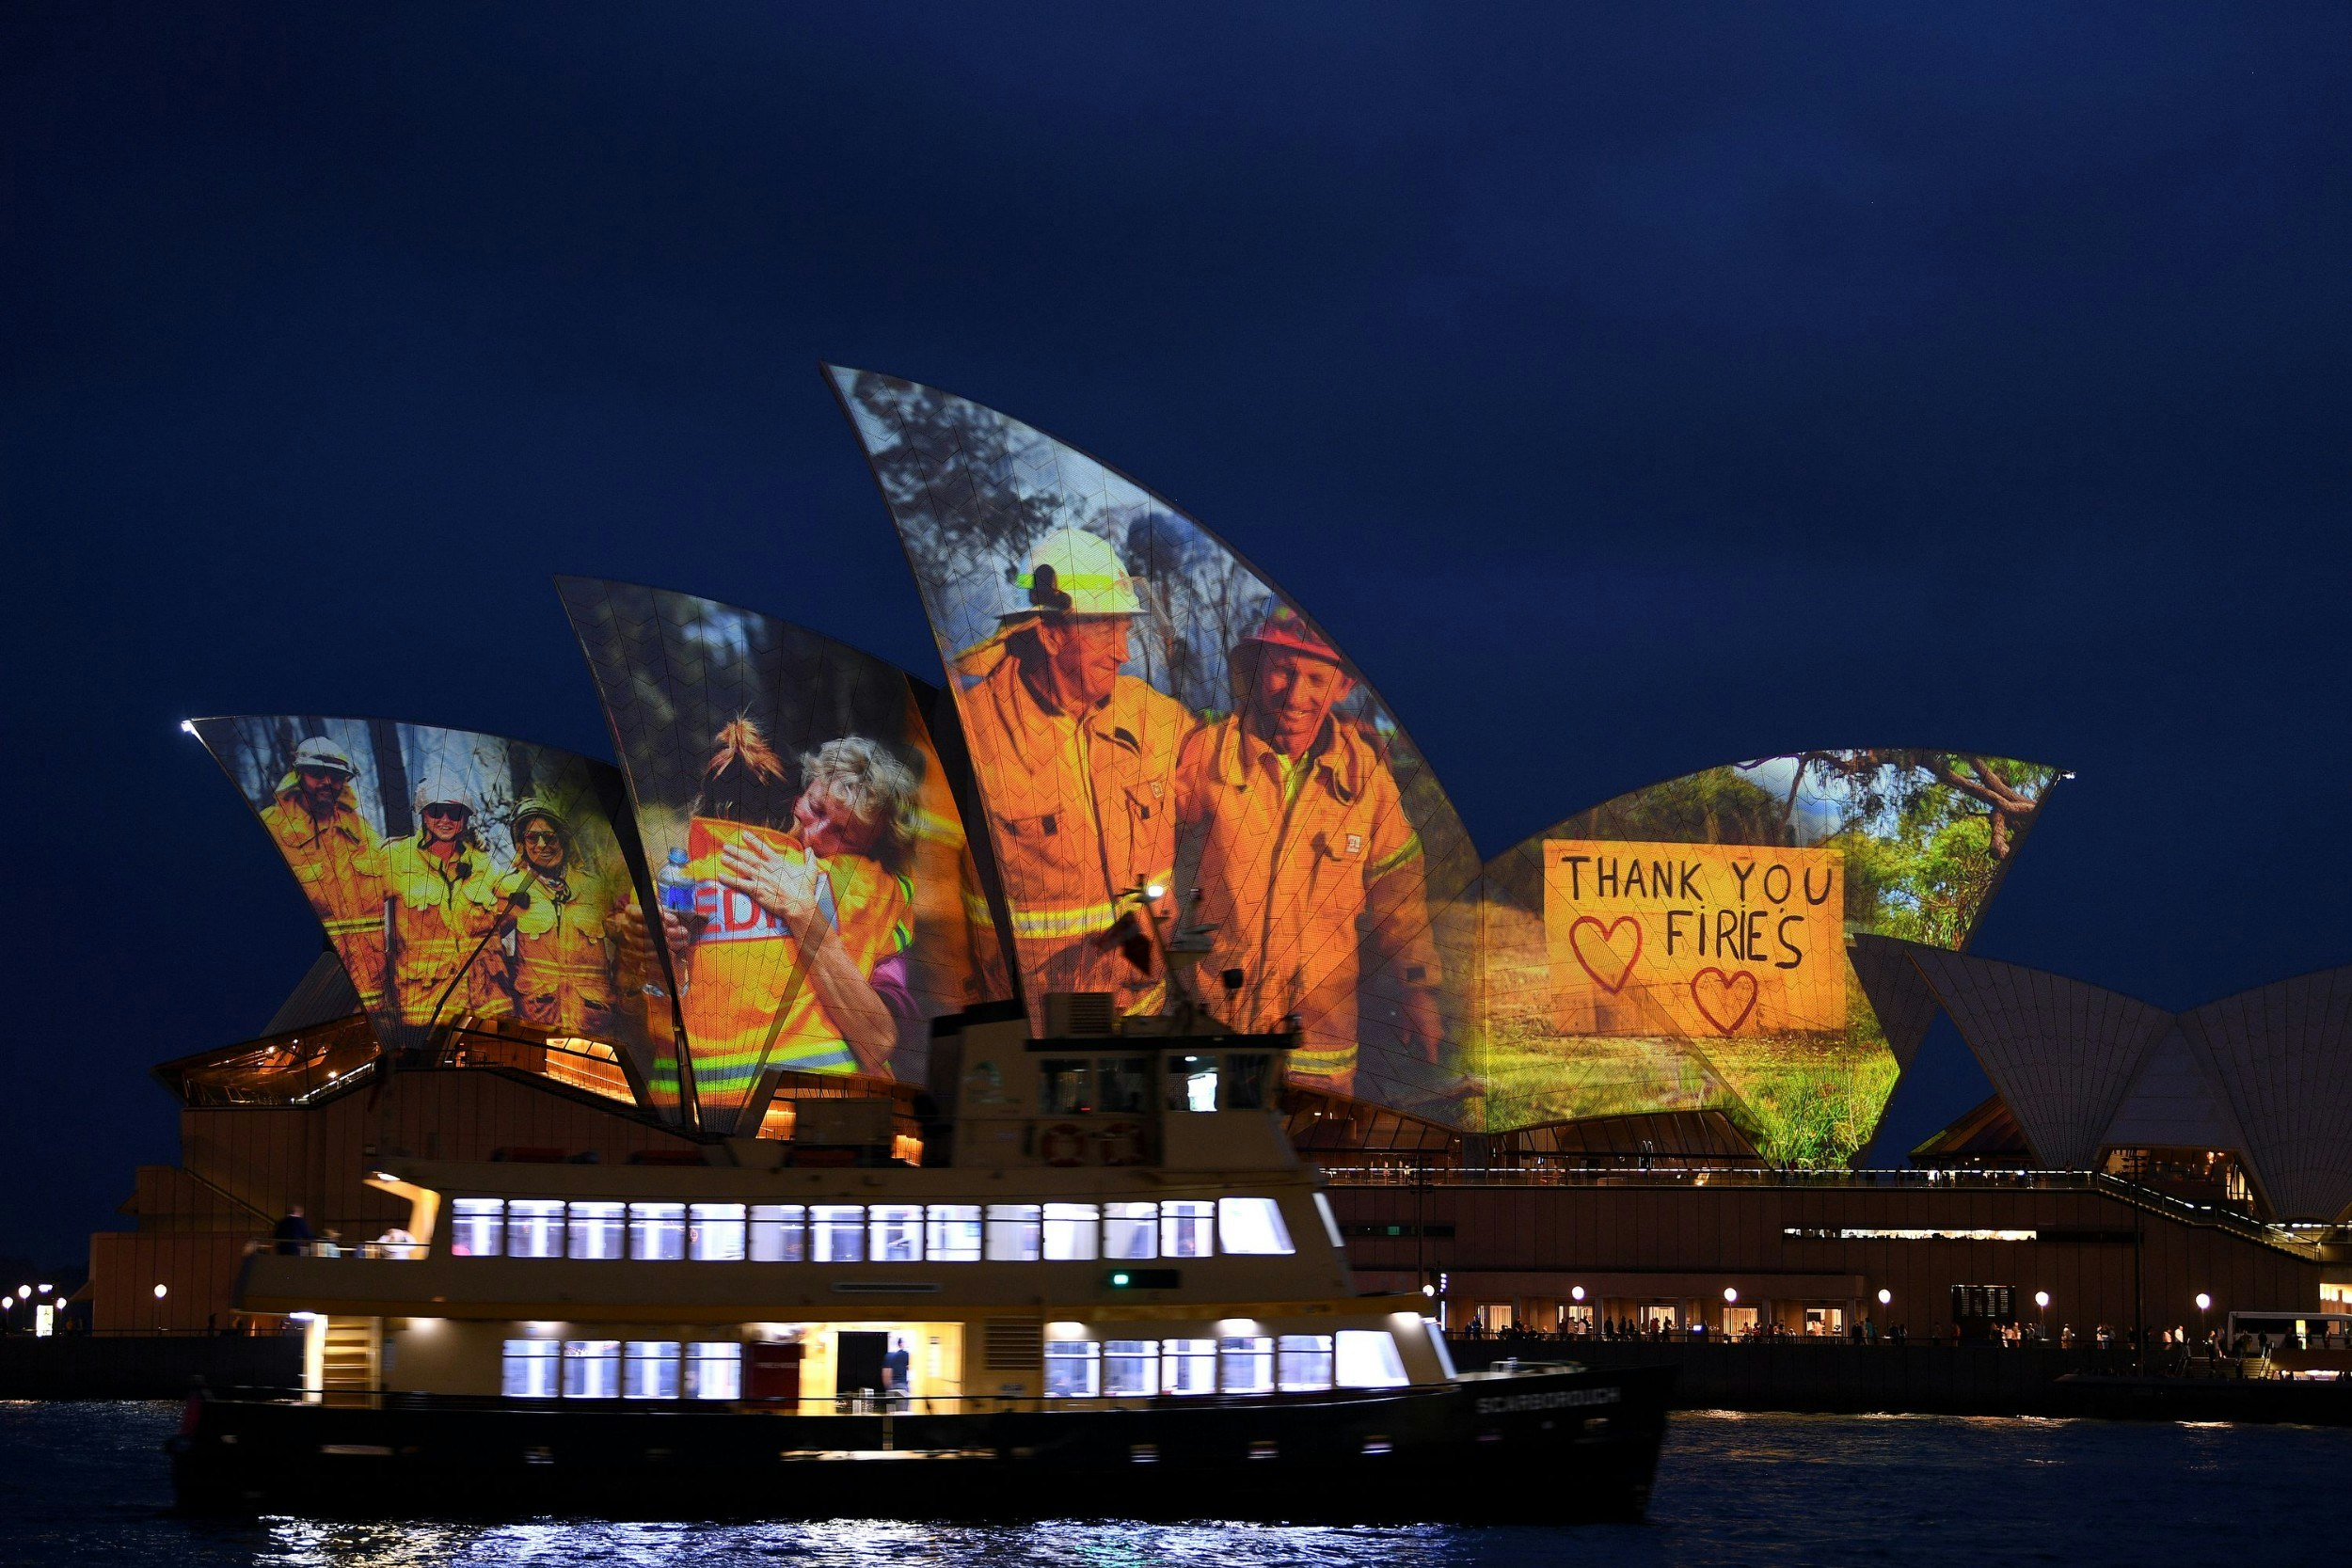 A cruise ship in front of the Sydney Opera House, which is lit up with a tribute to firefighters